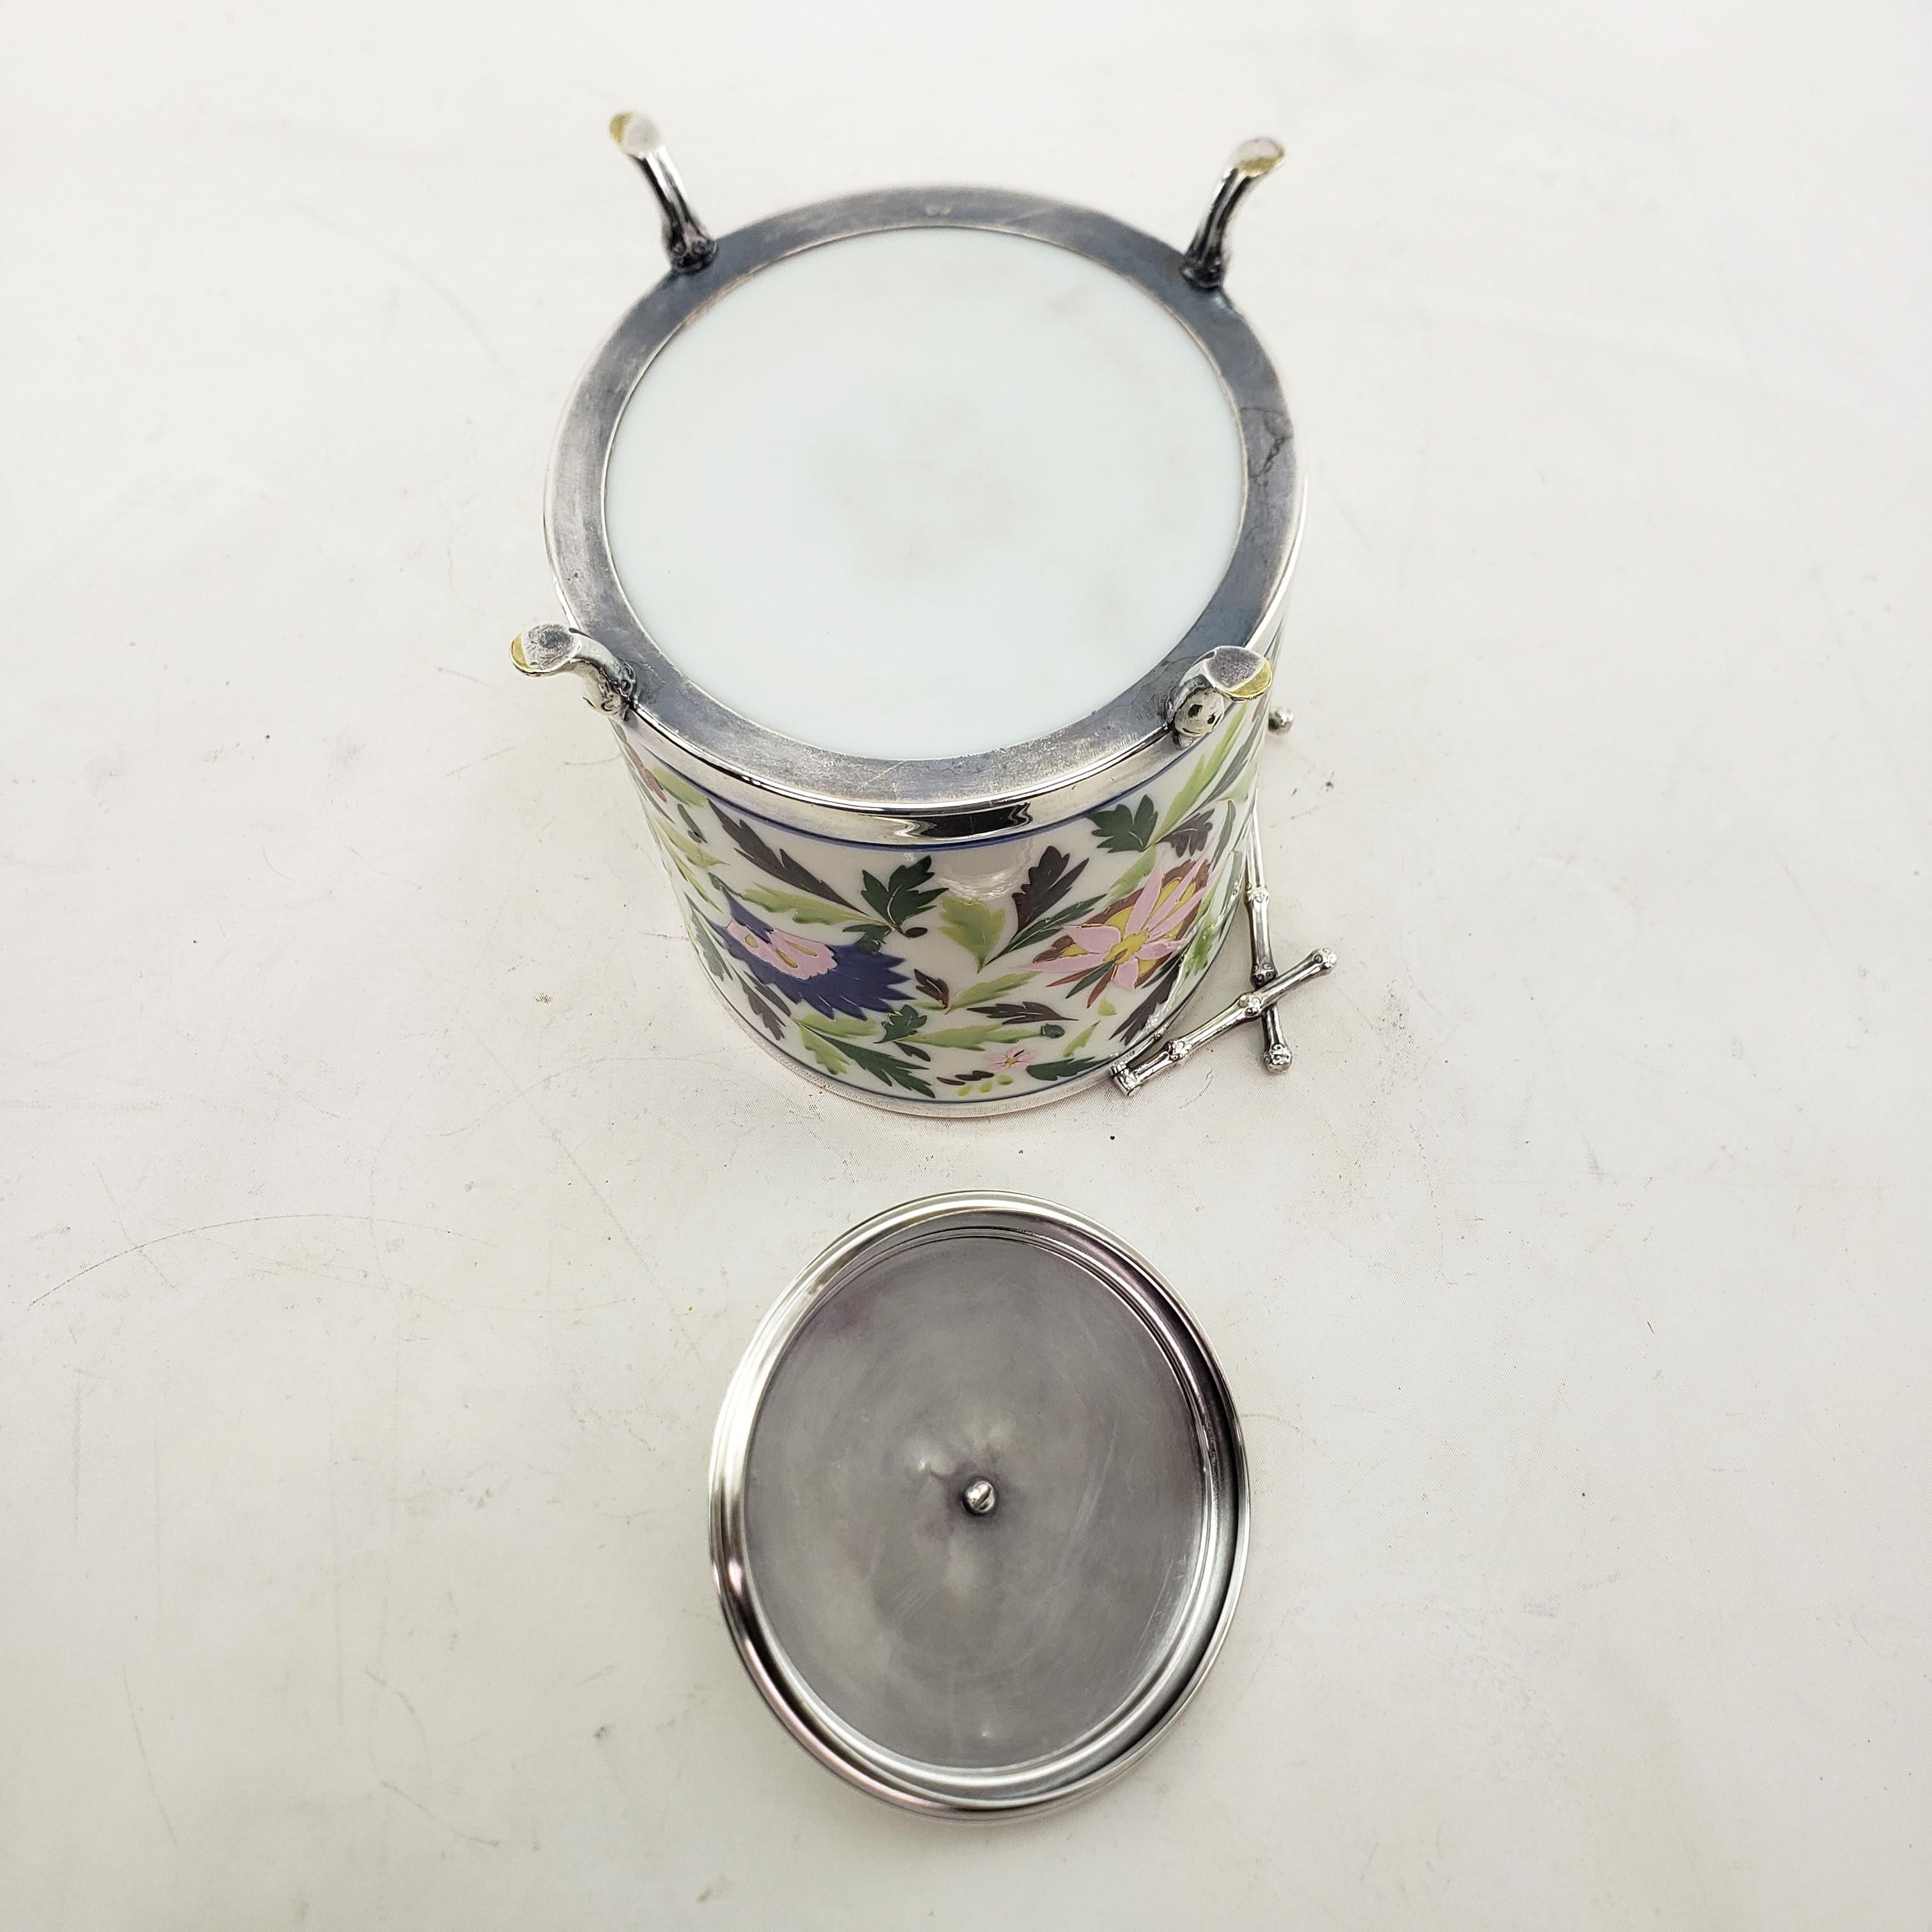  Silver Plated & Ceramic Biscuit Barrel with Floral Decoration & Twig Handle For Sale 1